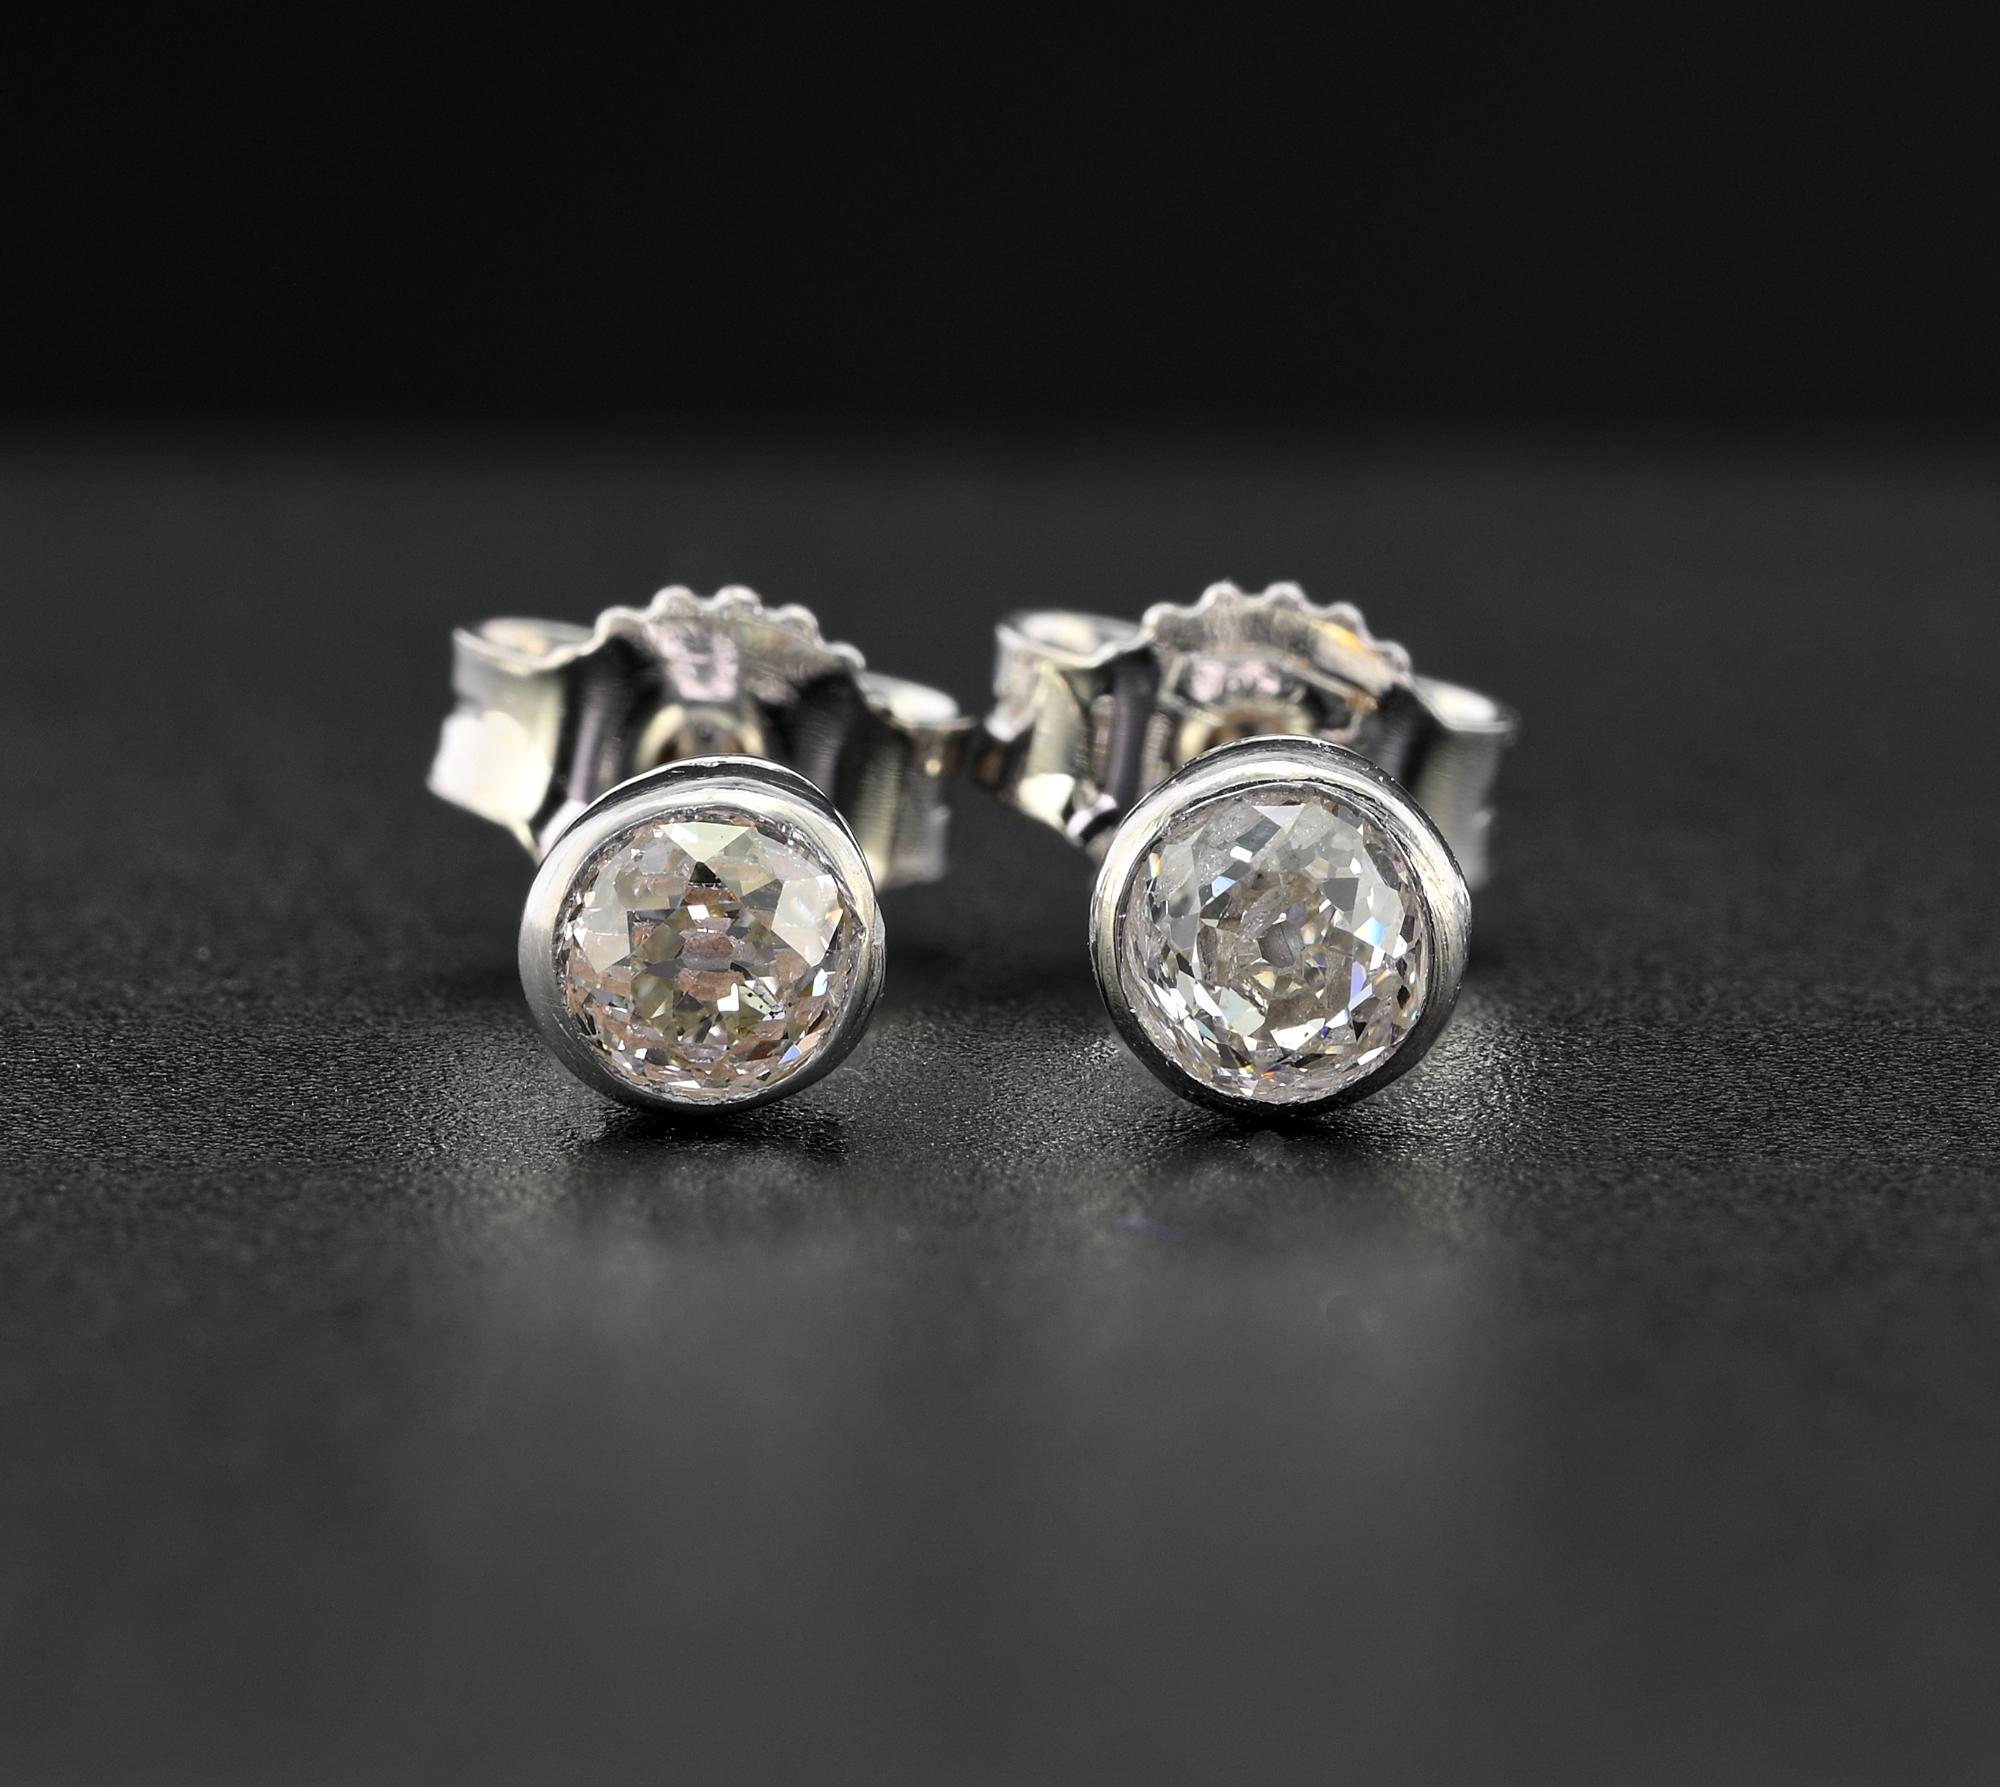 These charming Art Deco Diamond stud earrings are 1920 circa
Hand crafted of solid Platinum rub over mount and 18 Kt white gold for the pin and butterfly fasteners (new replacement)
Set with two old mine cut Diamonds of .40 Ct for both excellent